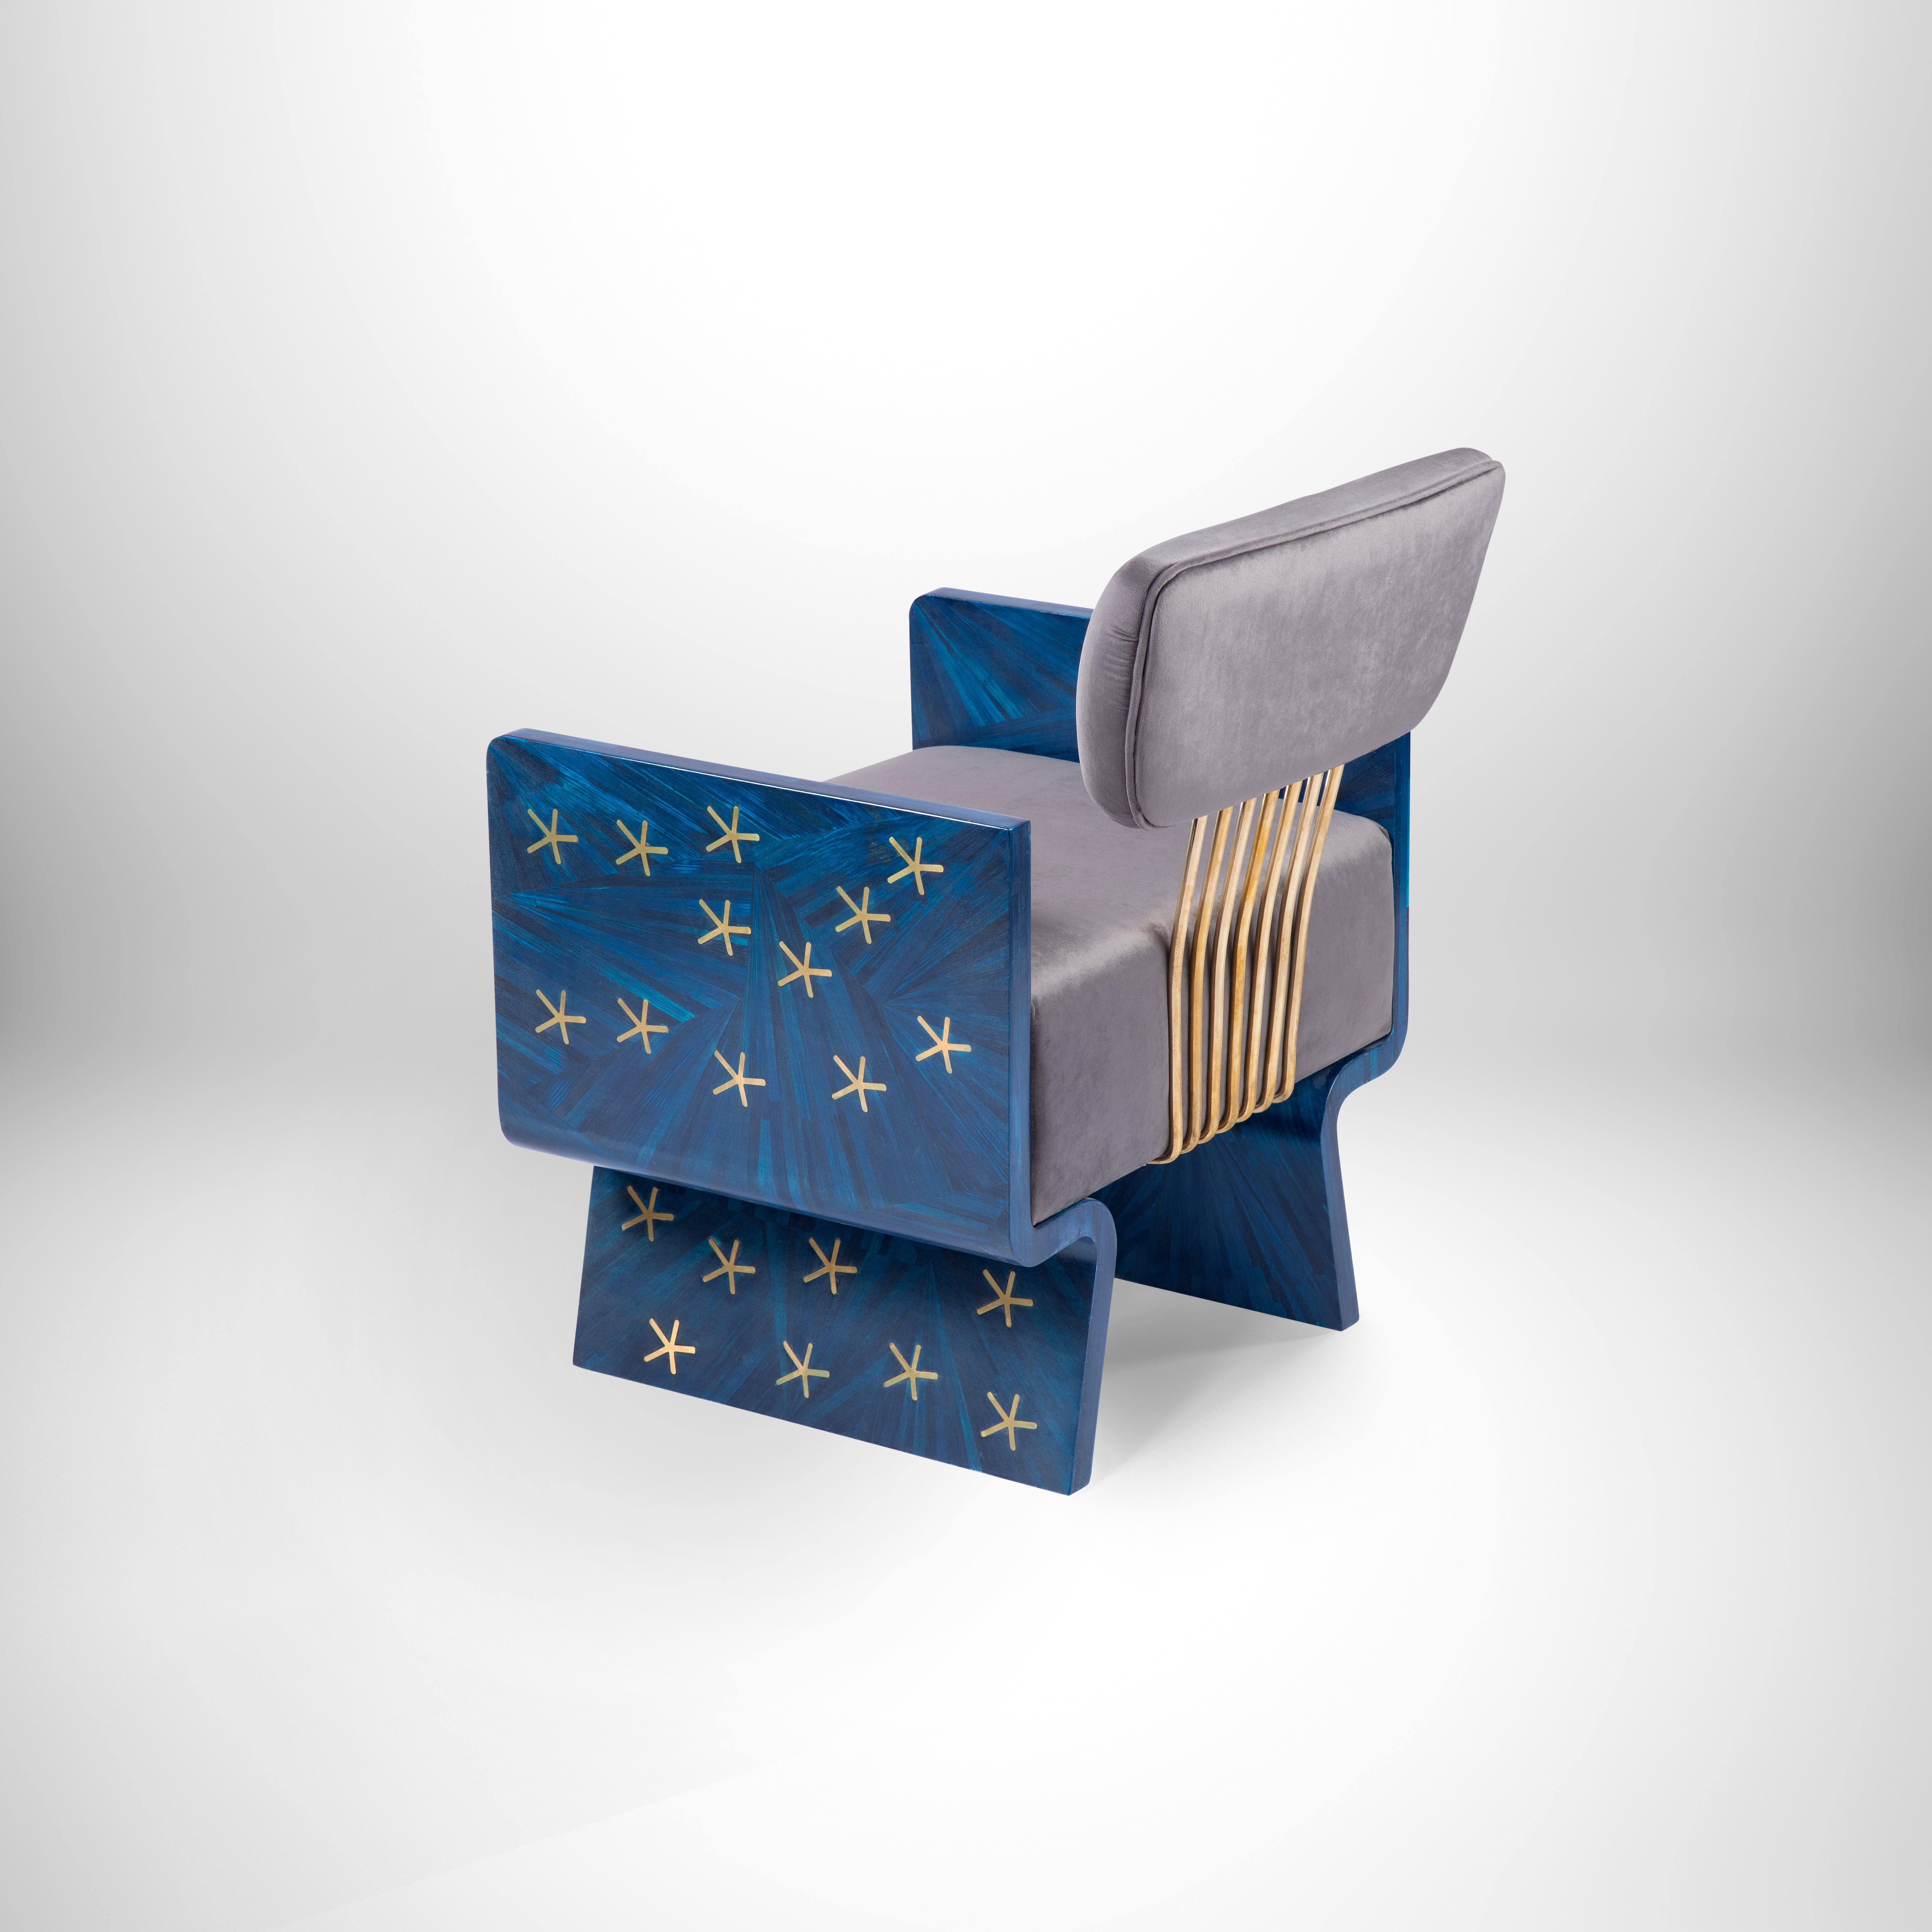 Egyptian Hand-Laid Brass Stars on Blue Straw, Nut-Inspired Armchair with Velvet Cushion For Sale